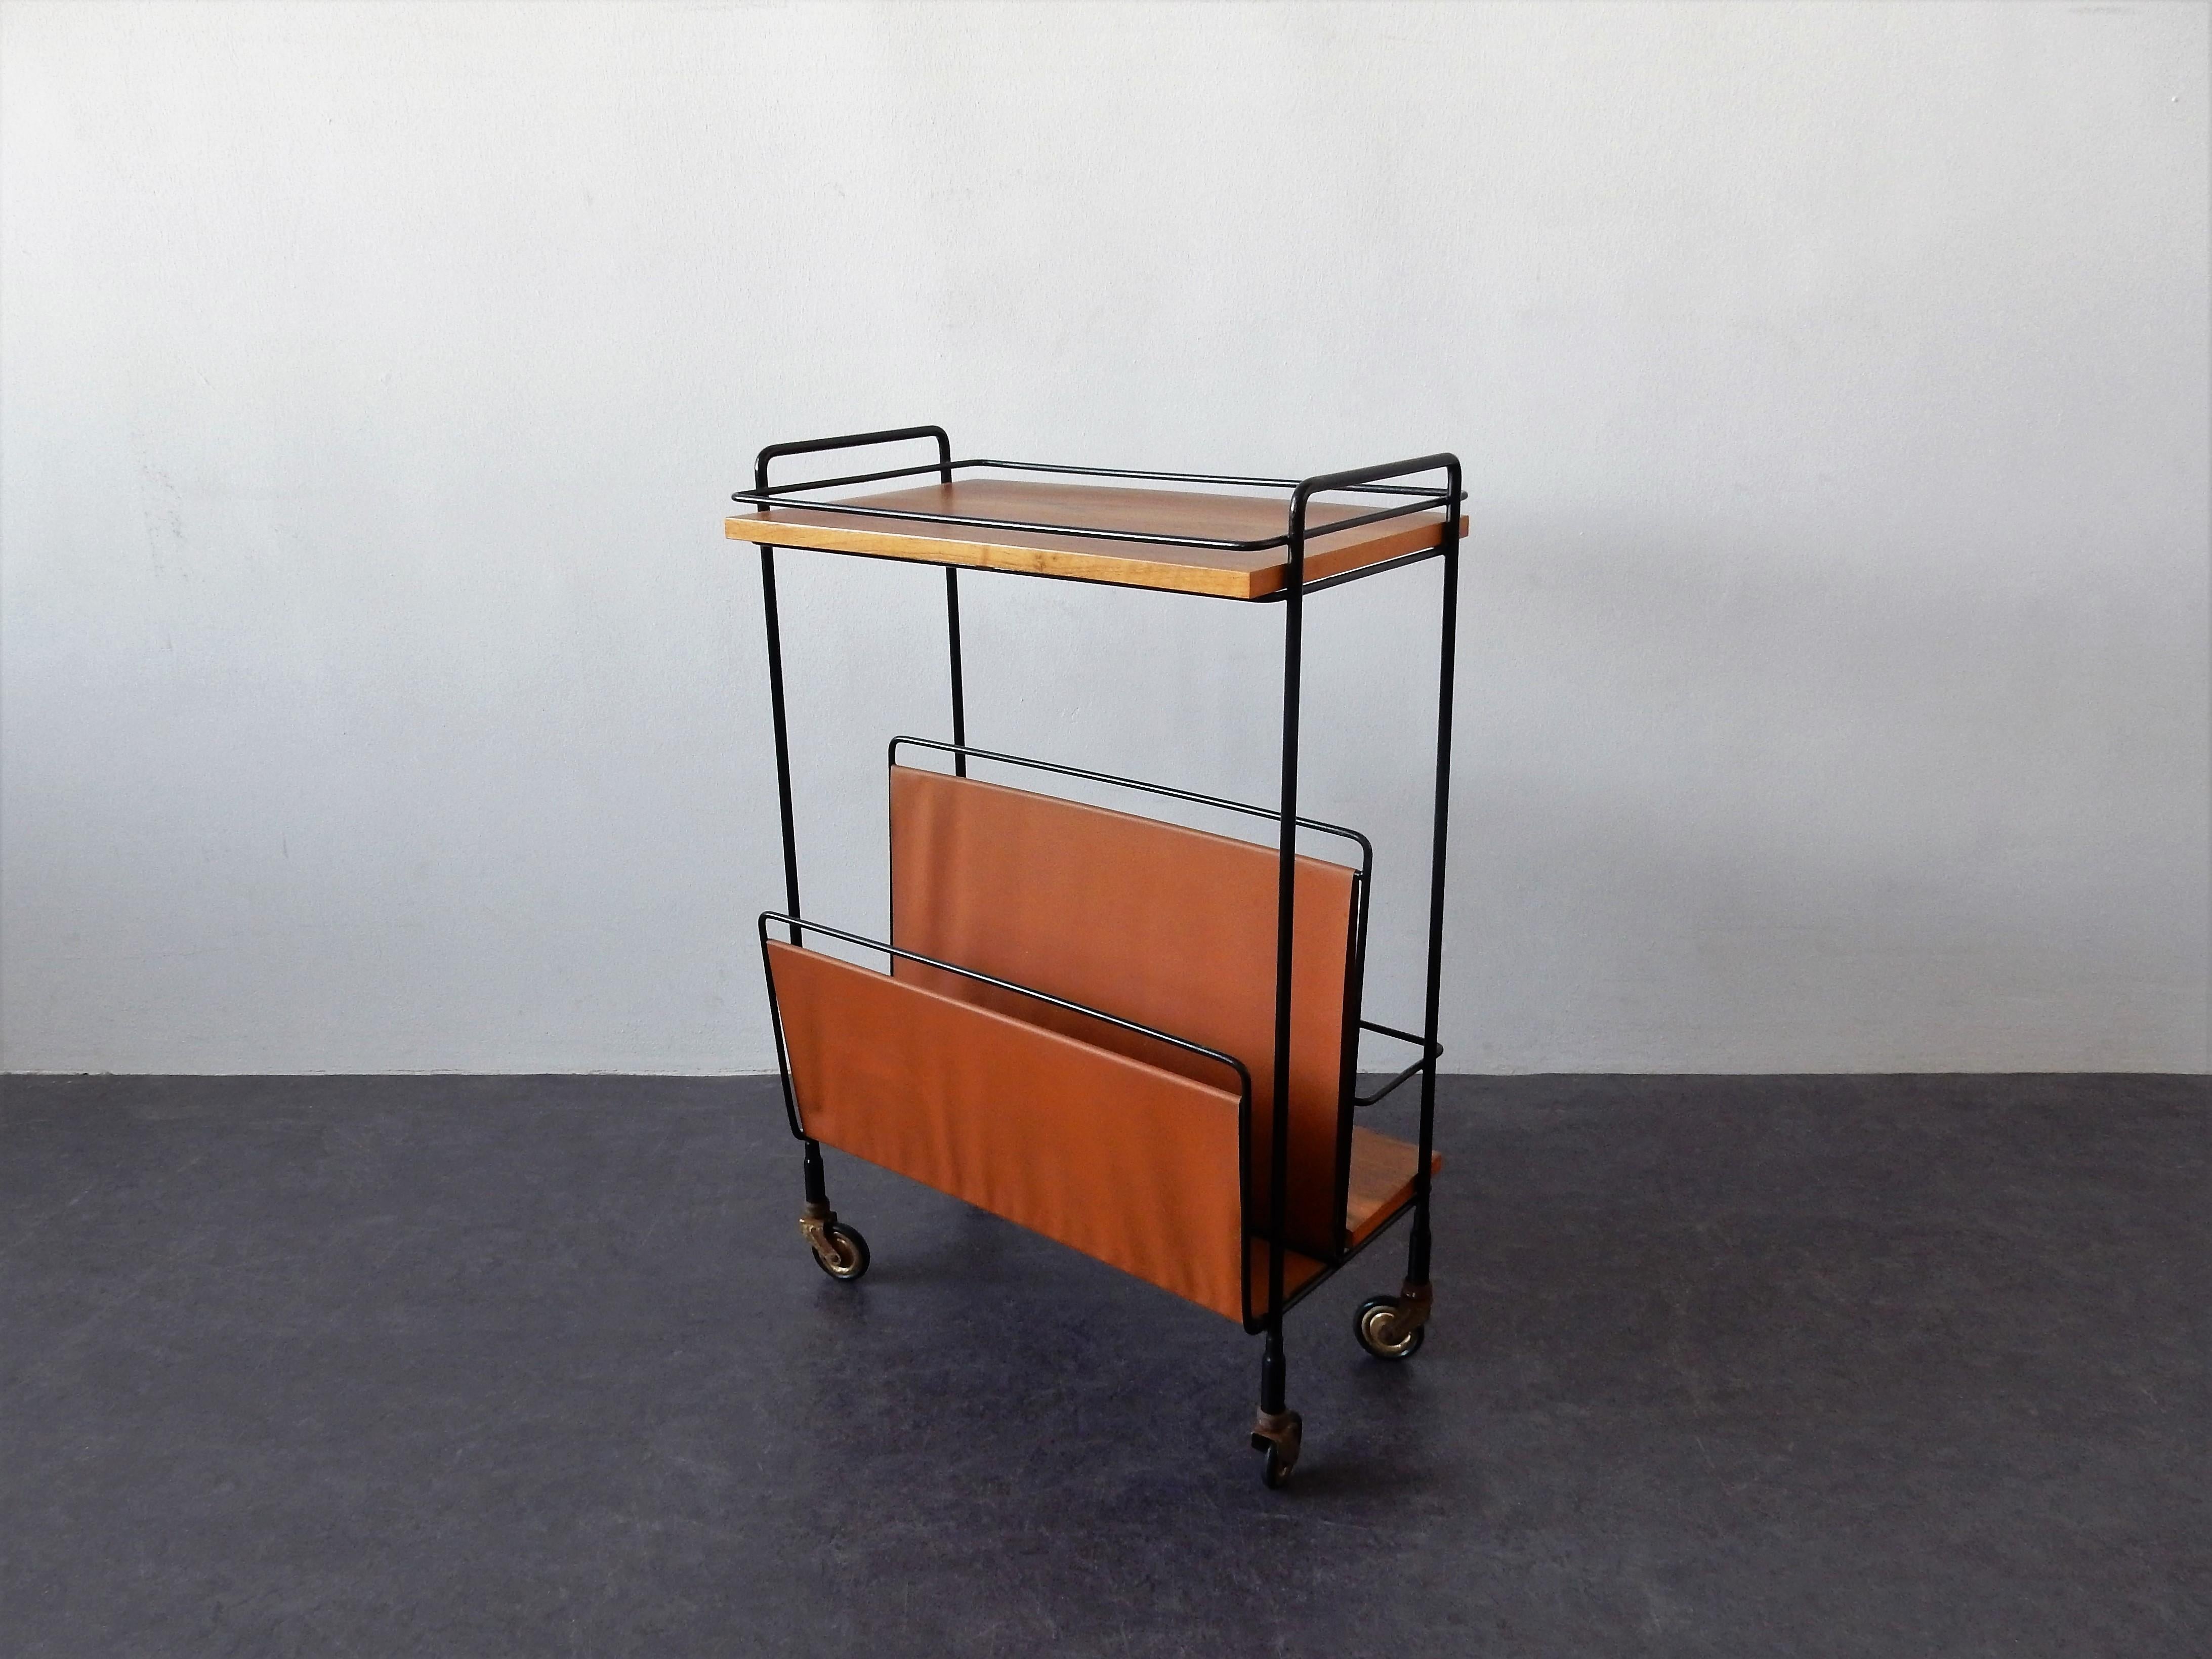 This is an excellent and stylish vintage trolley made in the 1960s. It has 2 wooden shelves, a metal frame with a compartment for bottles and a magazine rack in leather-look. The trolley stands on 4 small wheels. This trolley has been superficially